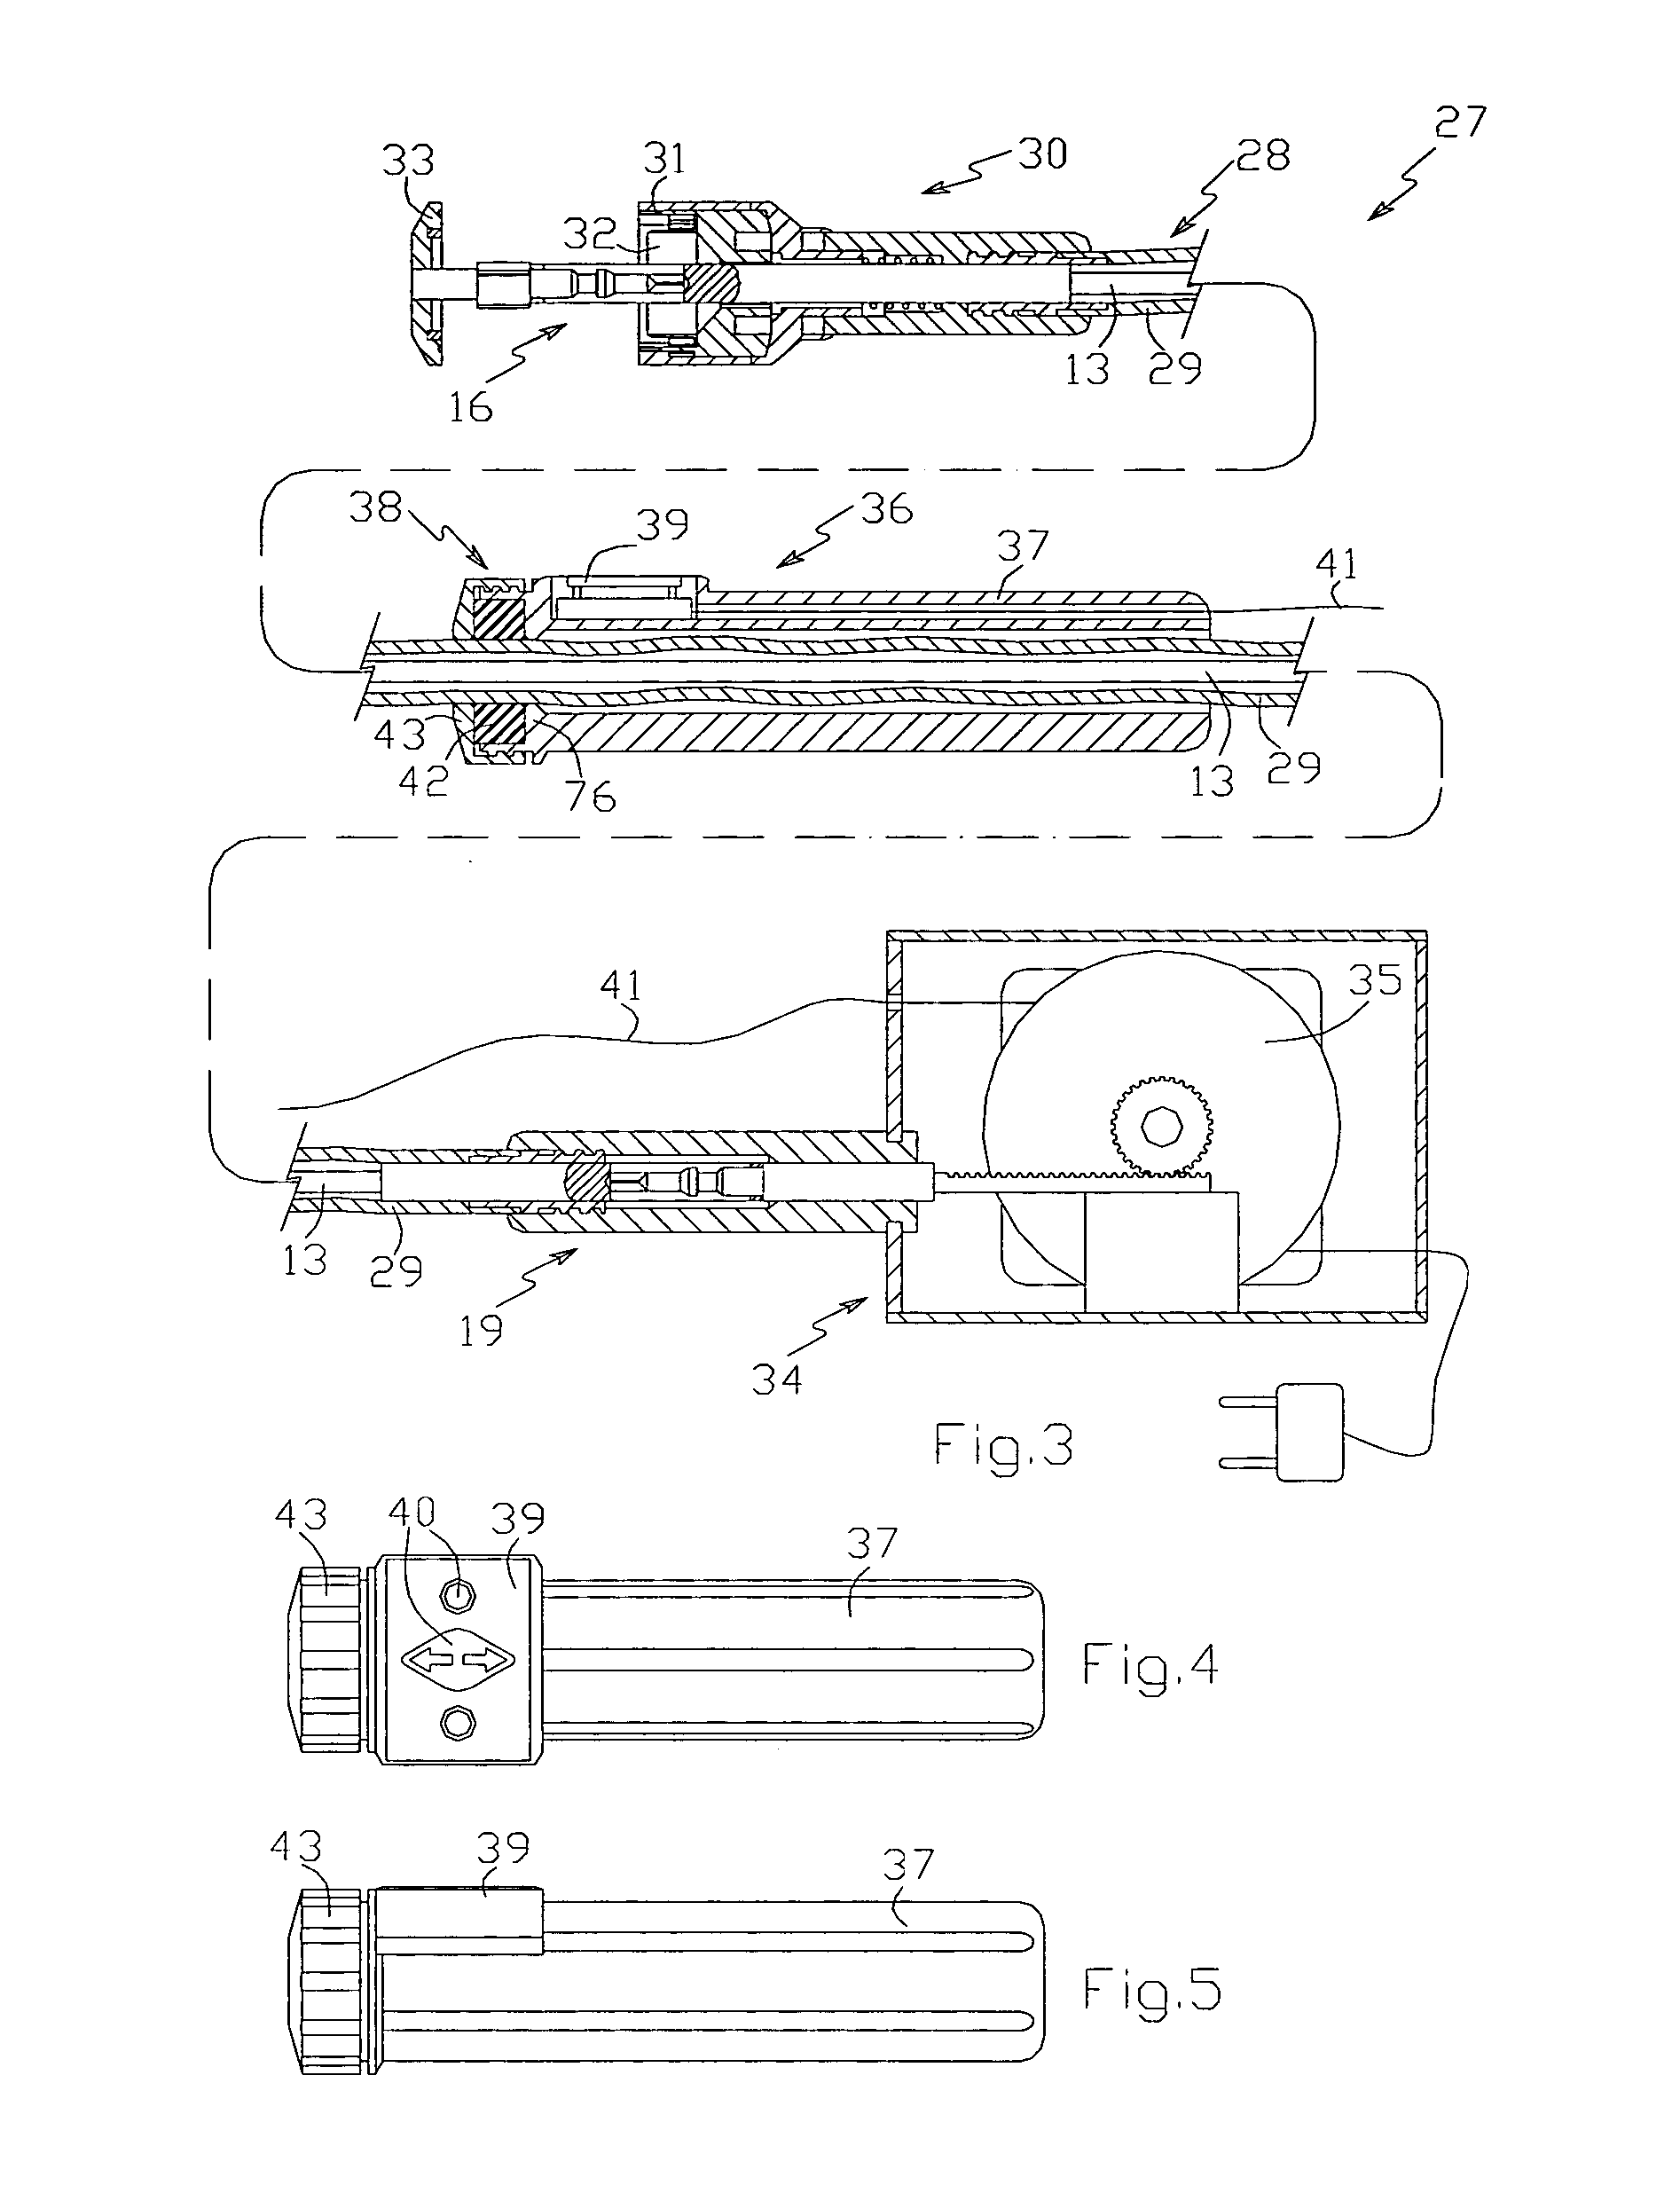 Surgical apparatus with remote drive